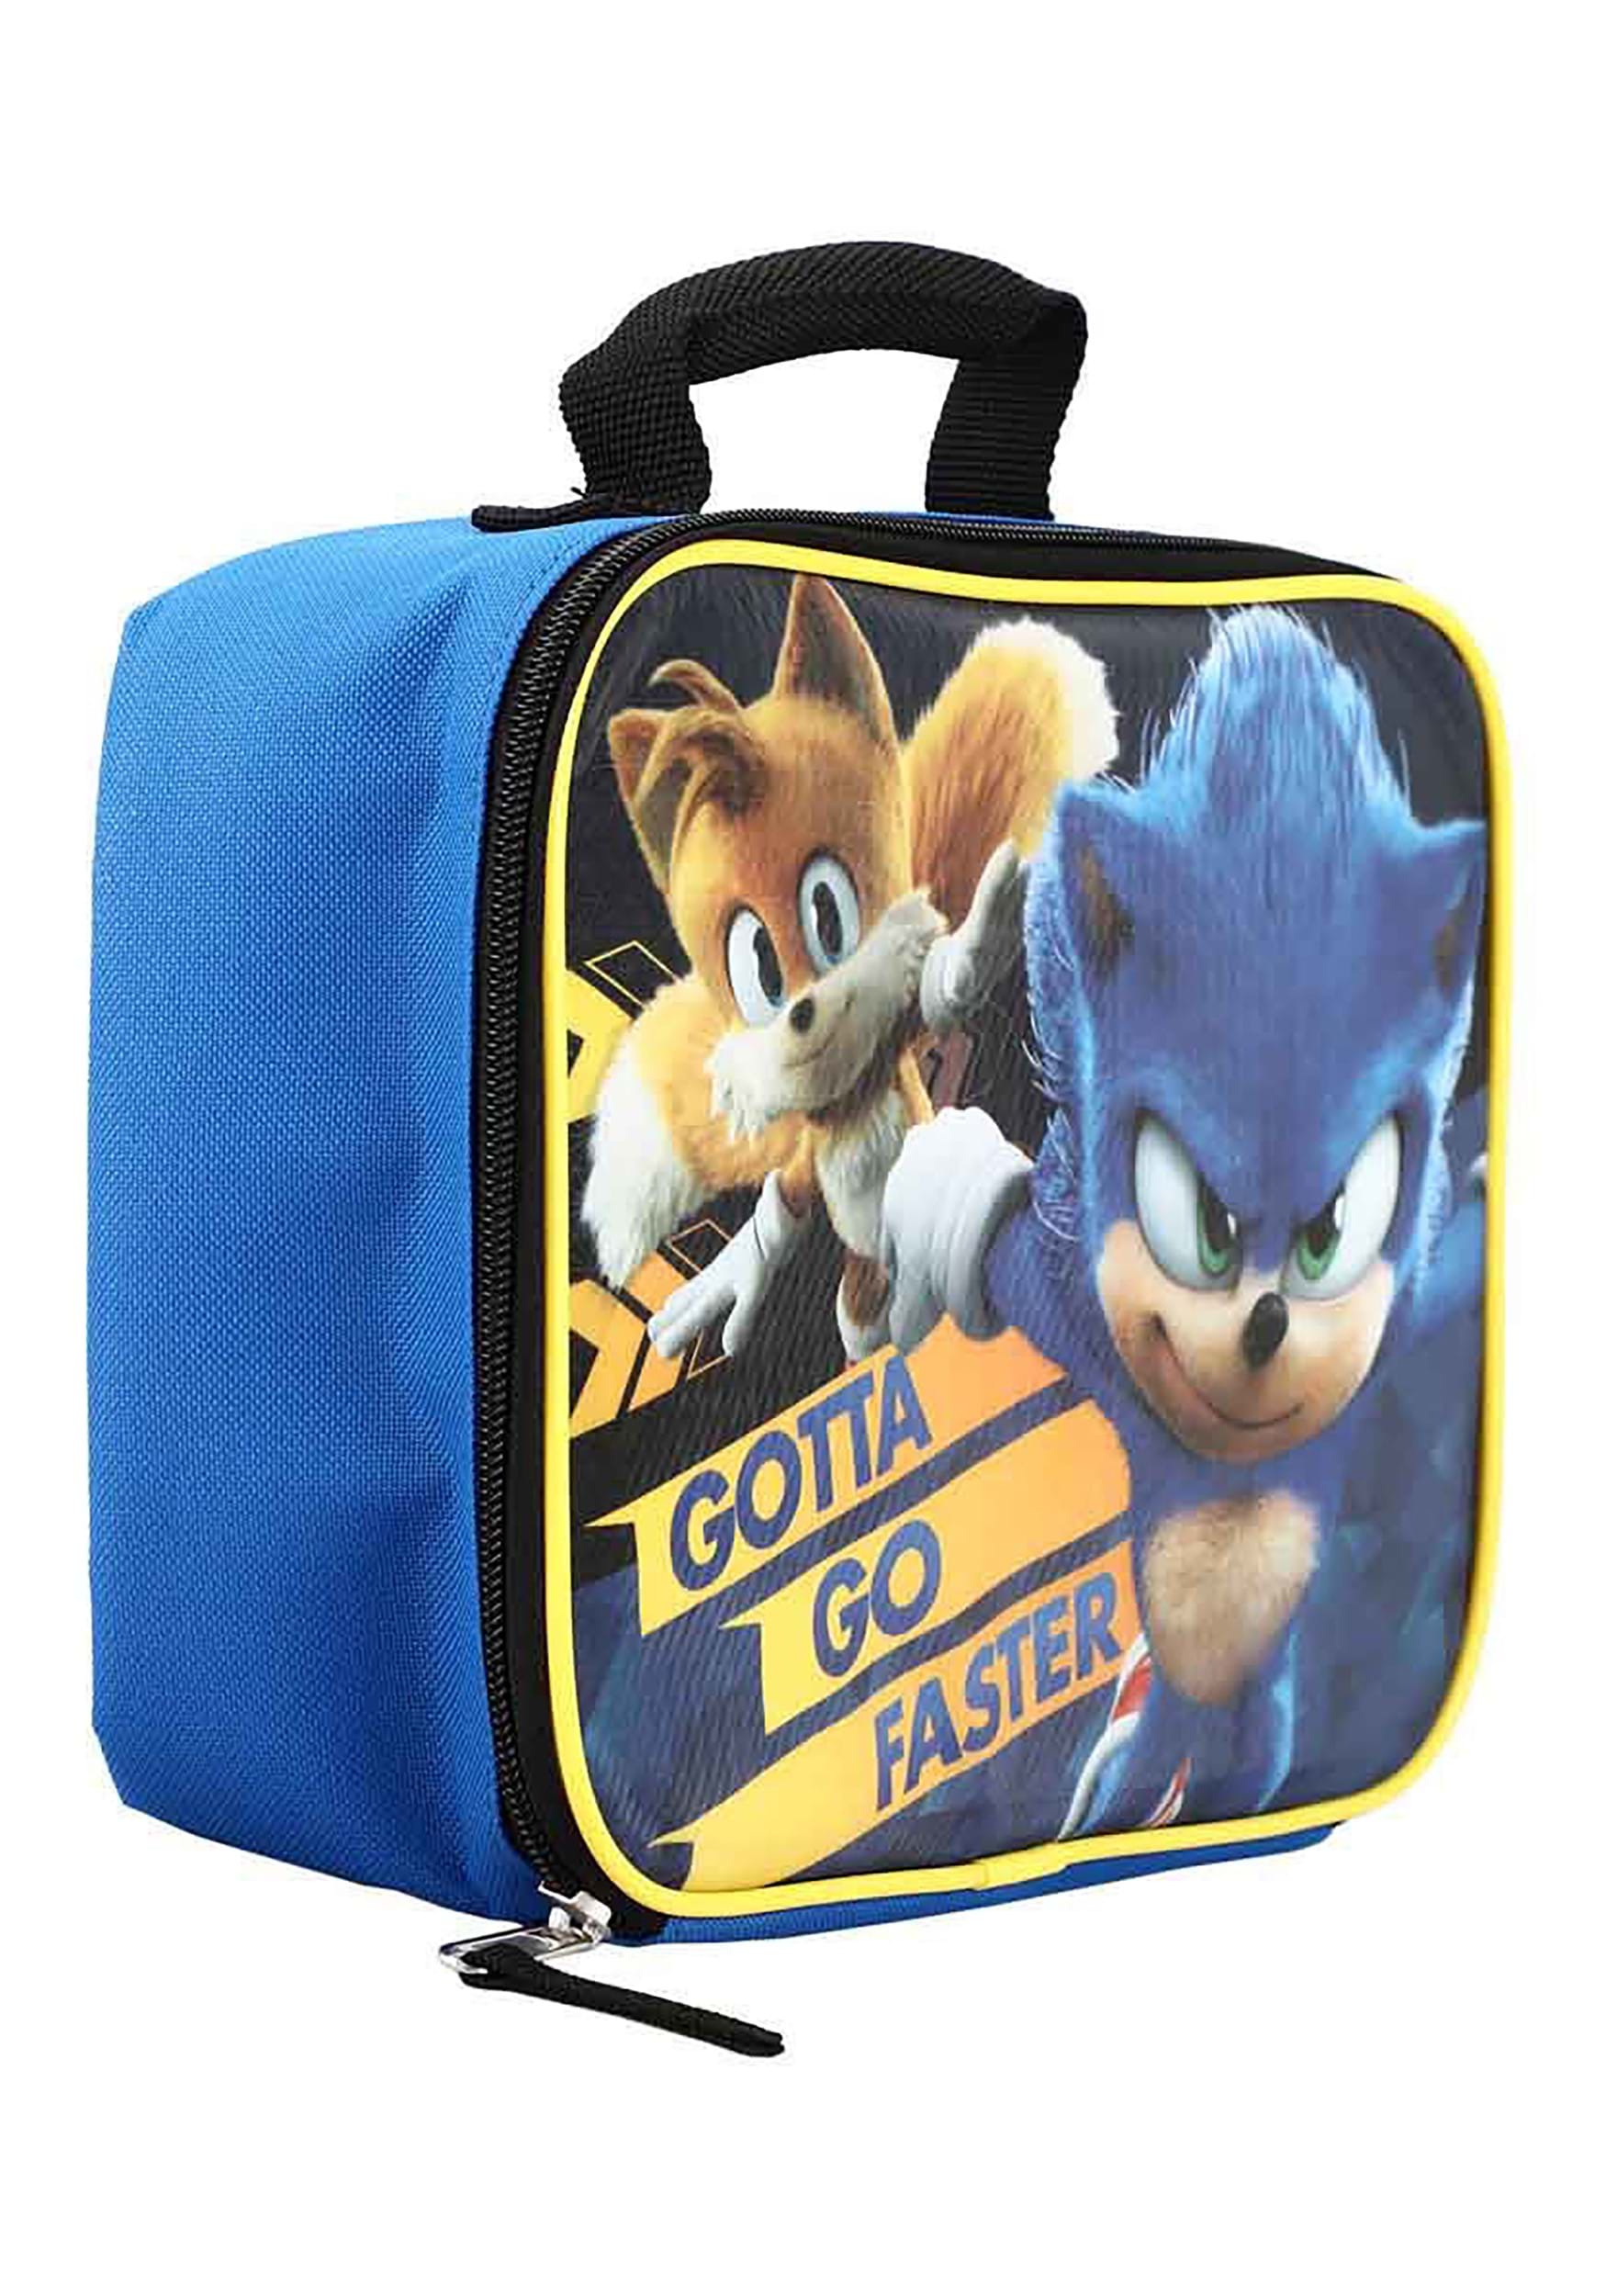 Sonic The Hedgehog Gotta Go Faster Lunch Tote